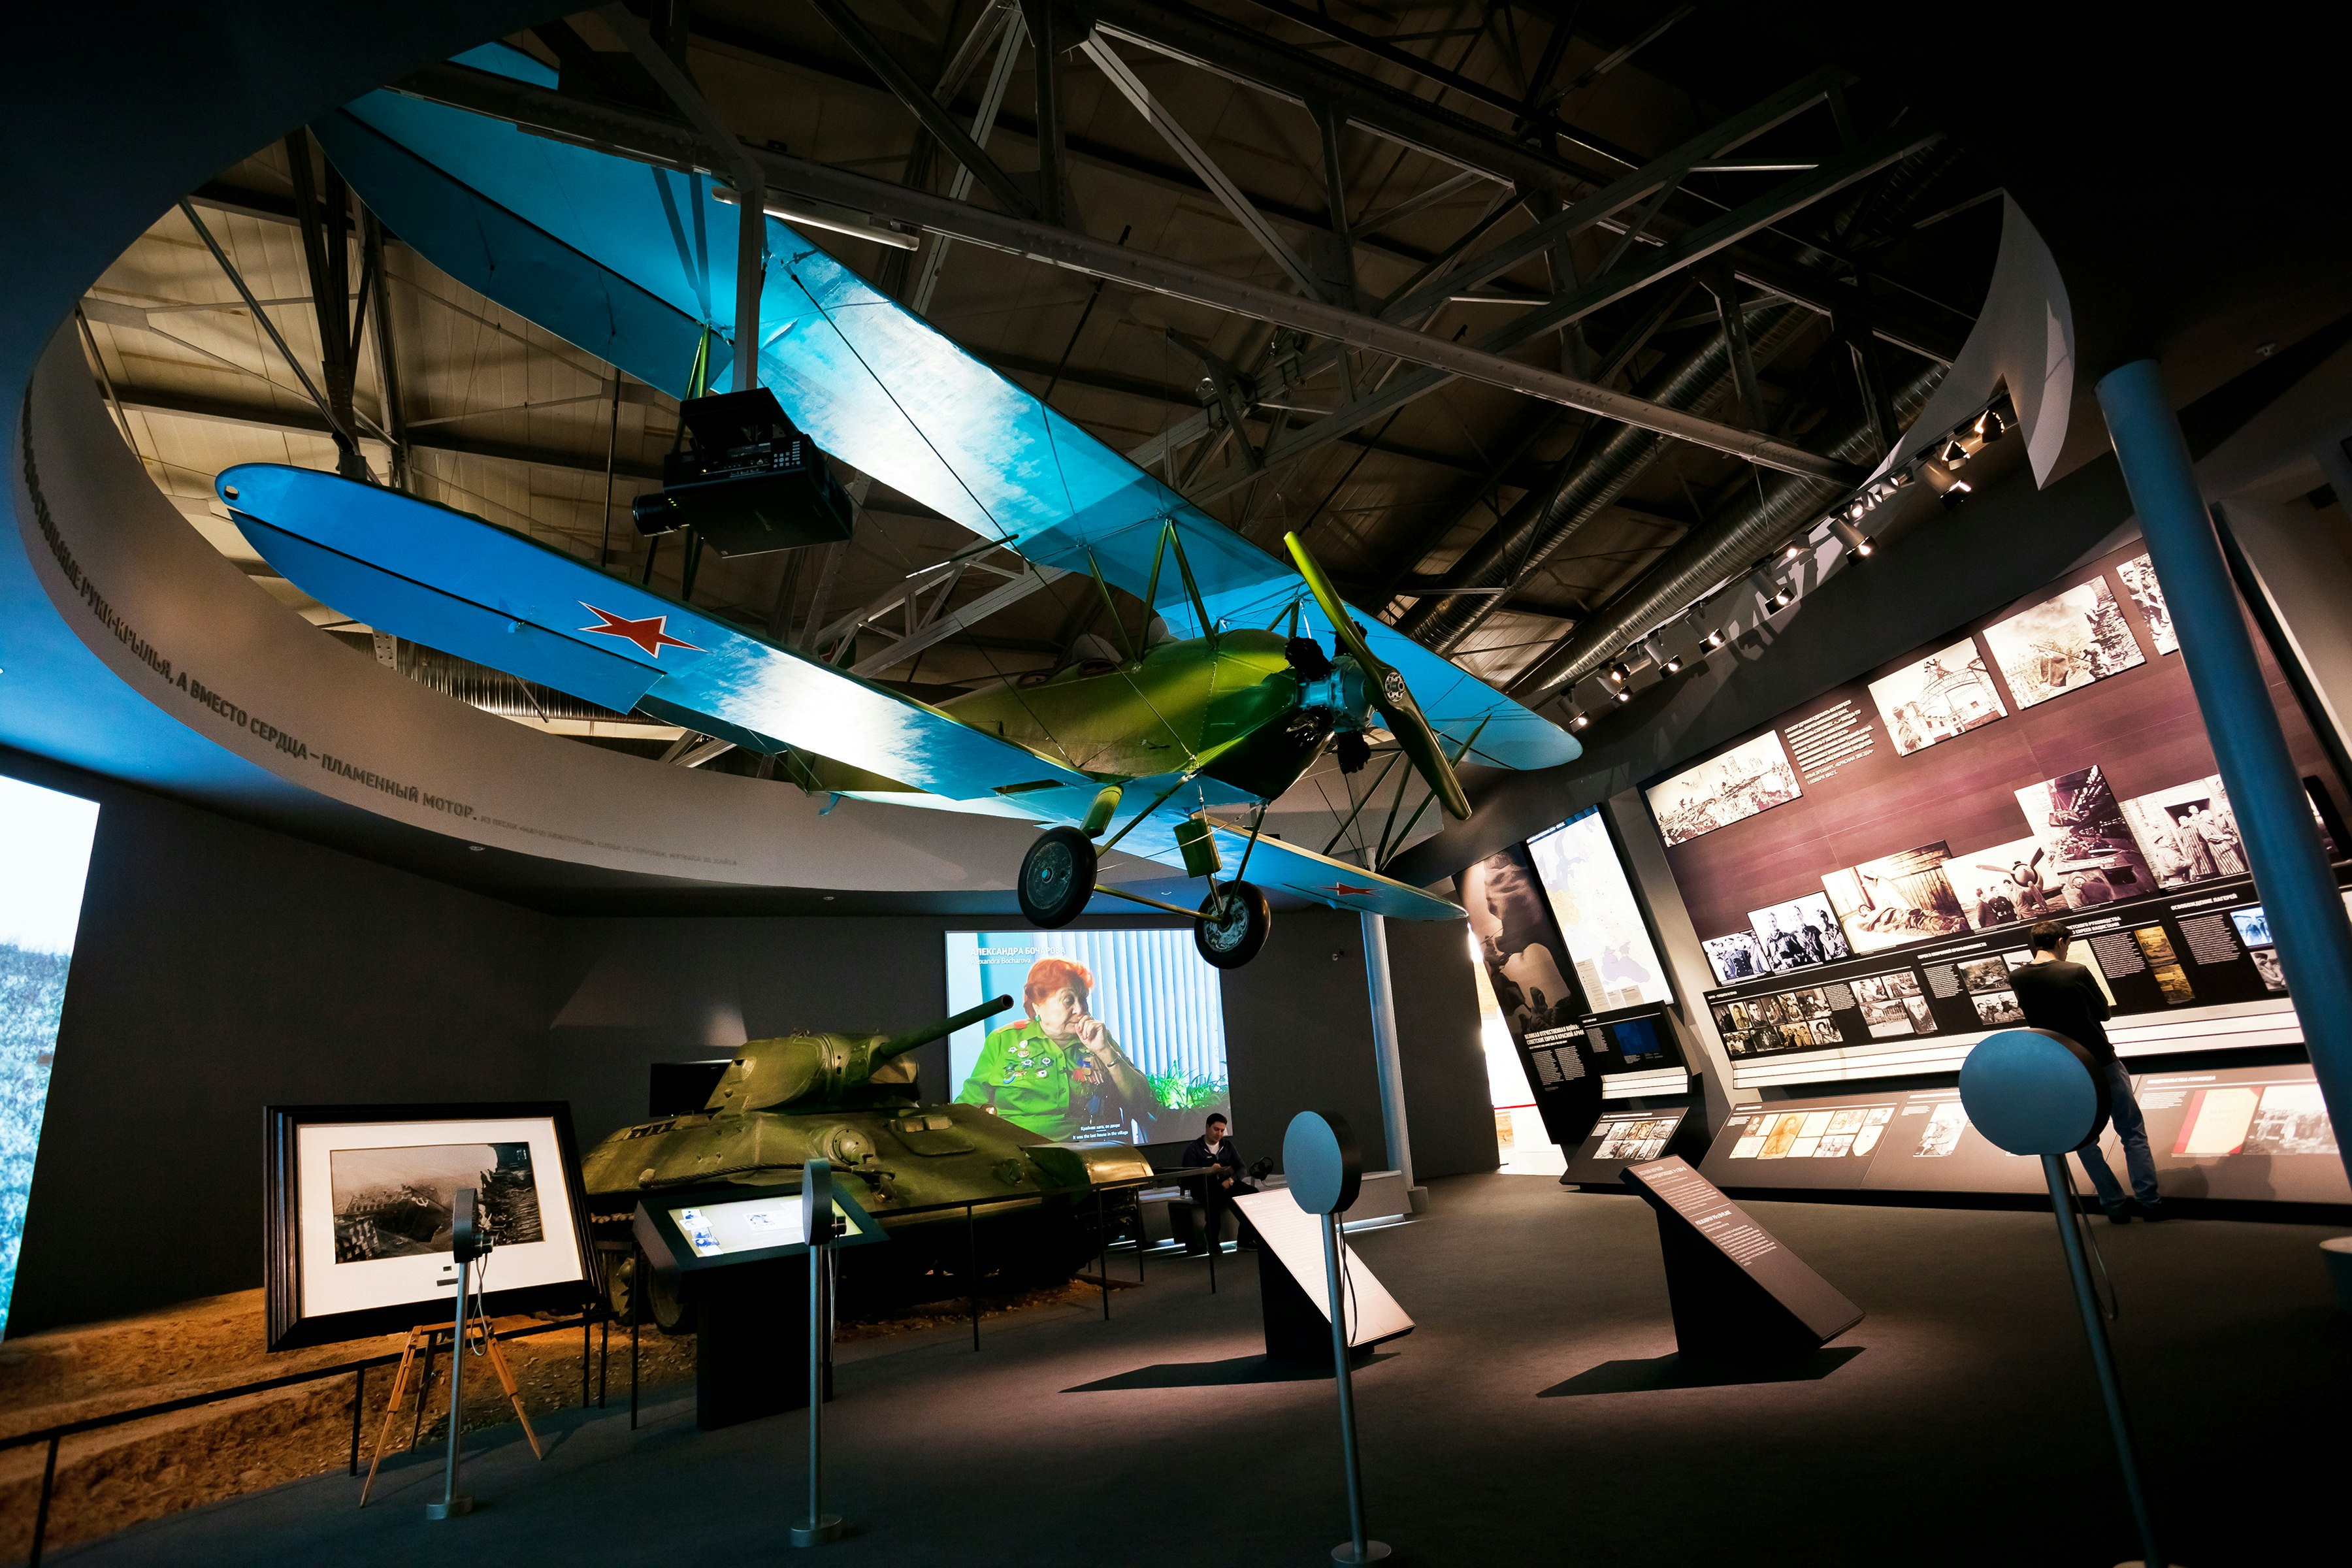 A large dark room, with many illuminated exhibits including a wall of black-and-white photographs. A tank stands against a wall and a biplane hangs from the ceiling